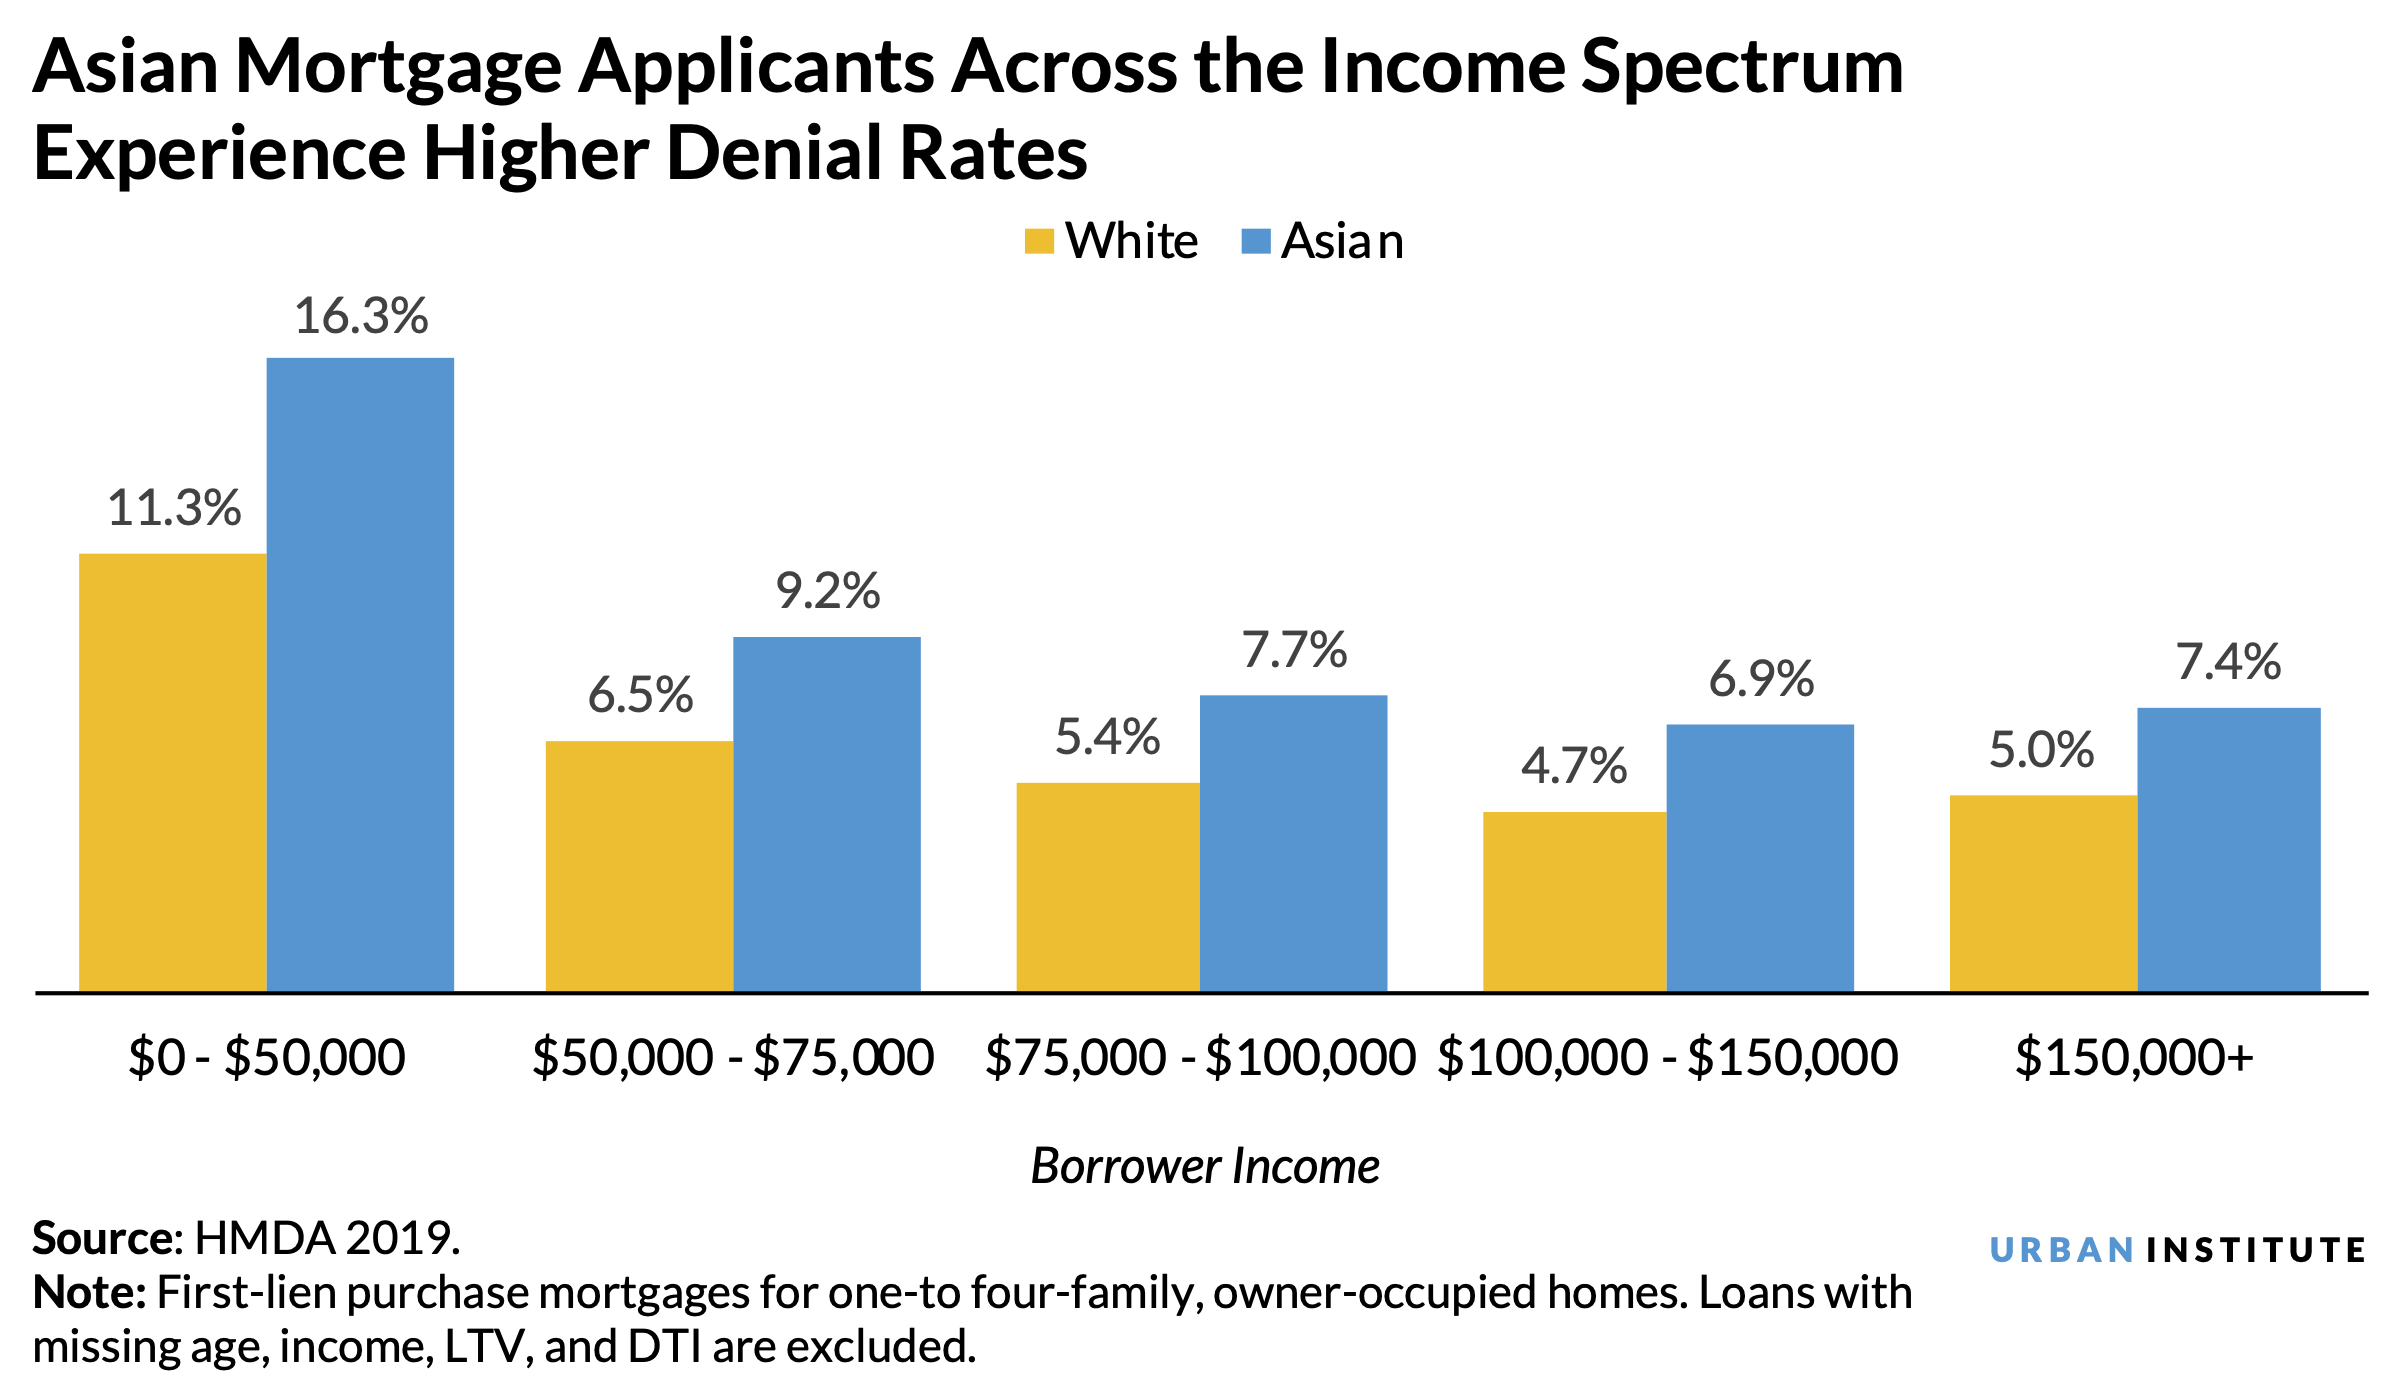  A bar chart showing at every income level, Asian mortgage applicants experience higher denial rates. 